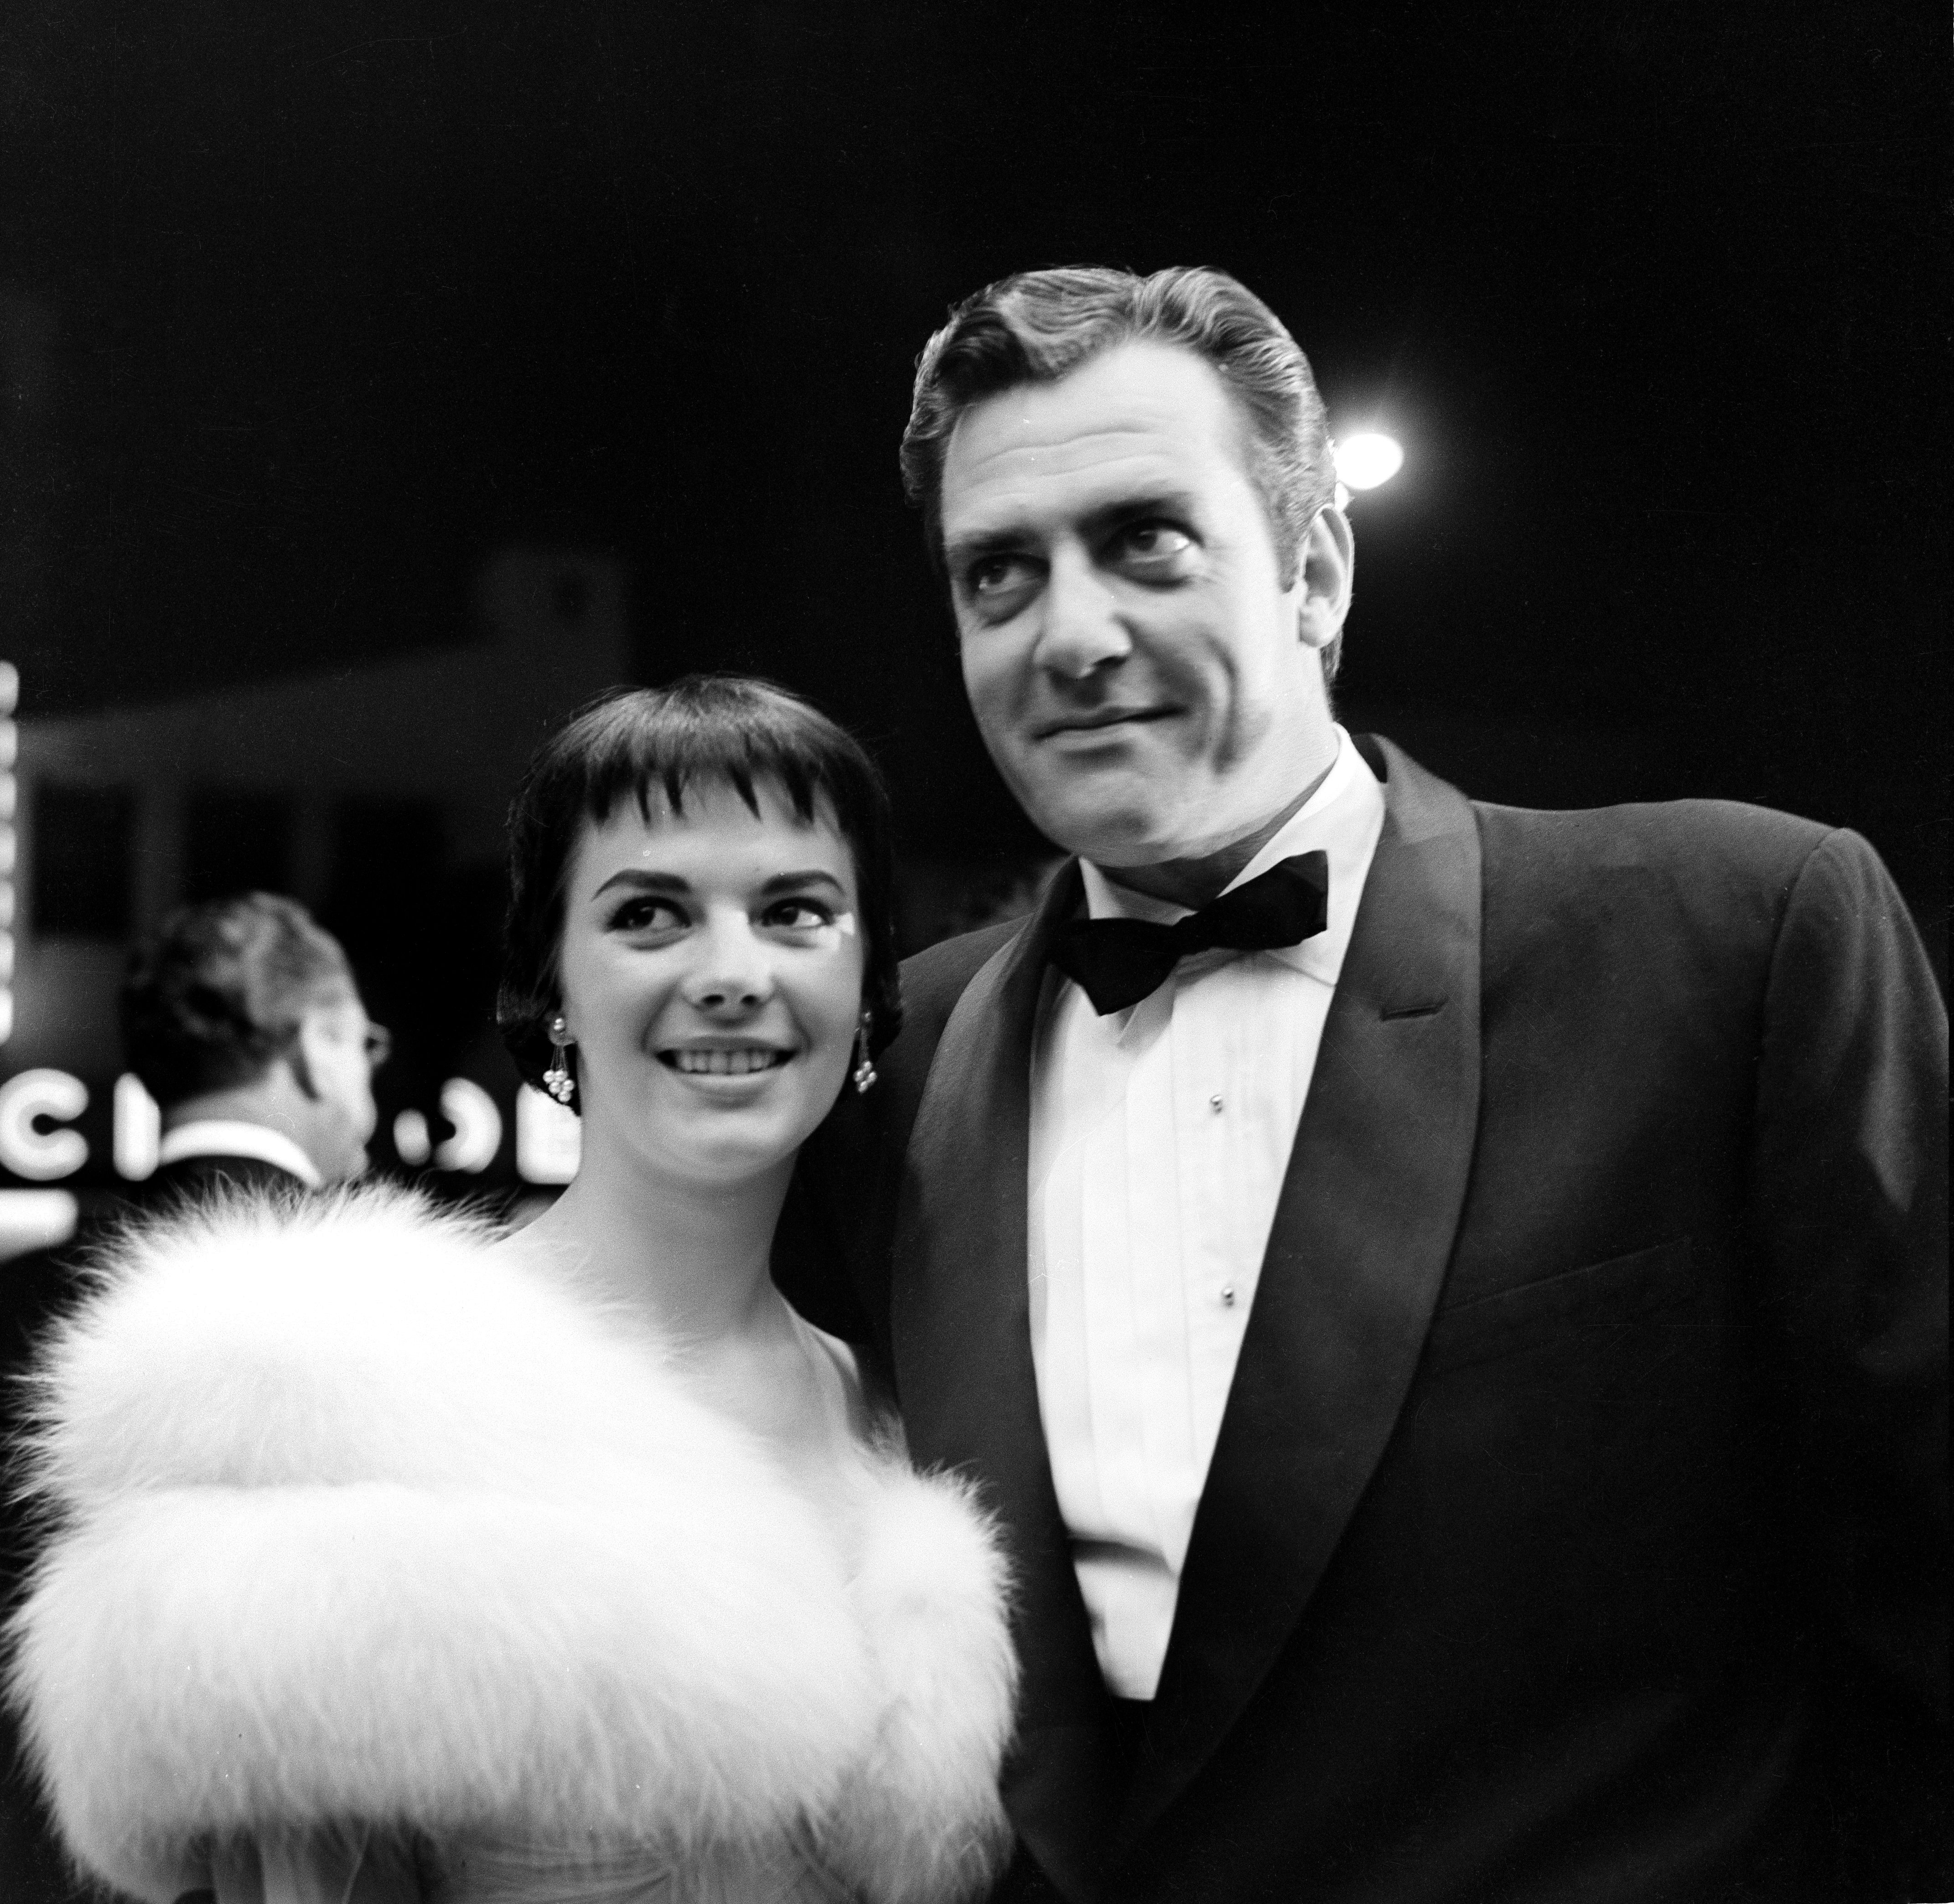 Actress Natalie Wood with actor Raymond Burr attend the premiere of "A Cry in the Night" in Los Angeles,CA. | Source: Getty Images